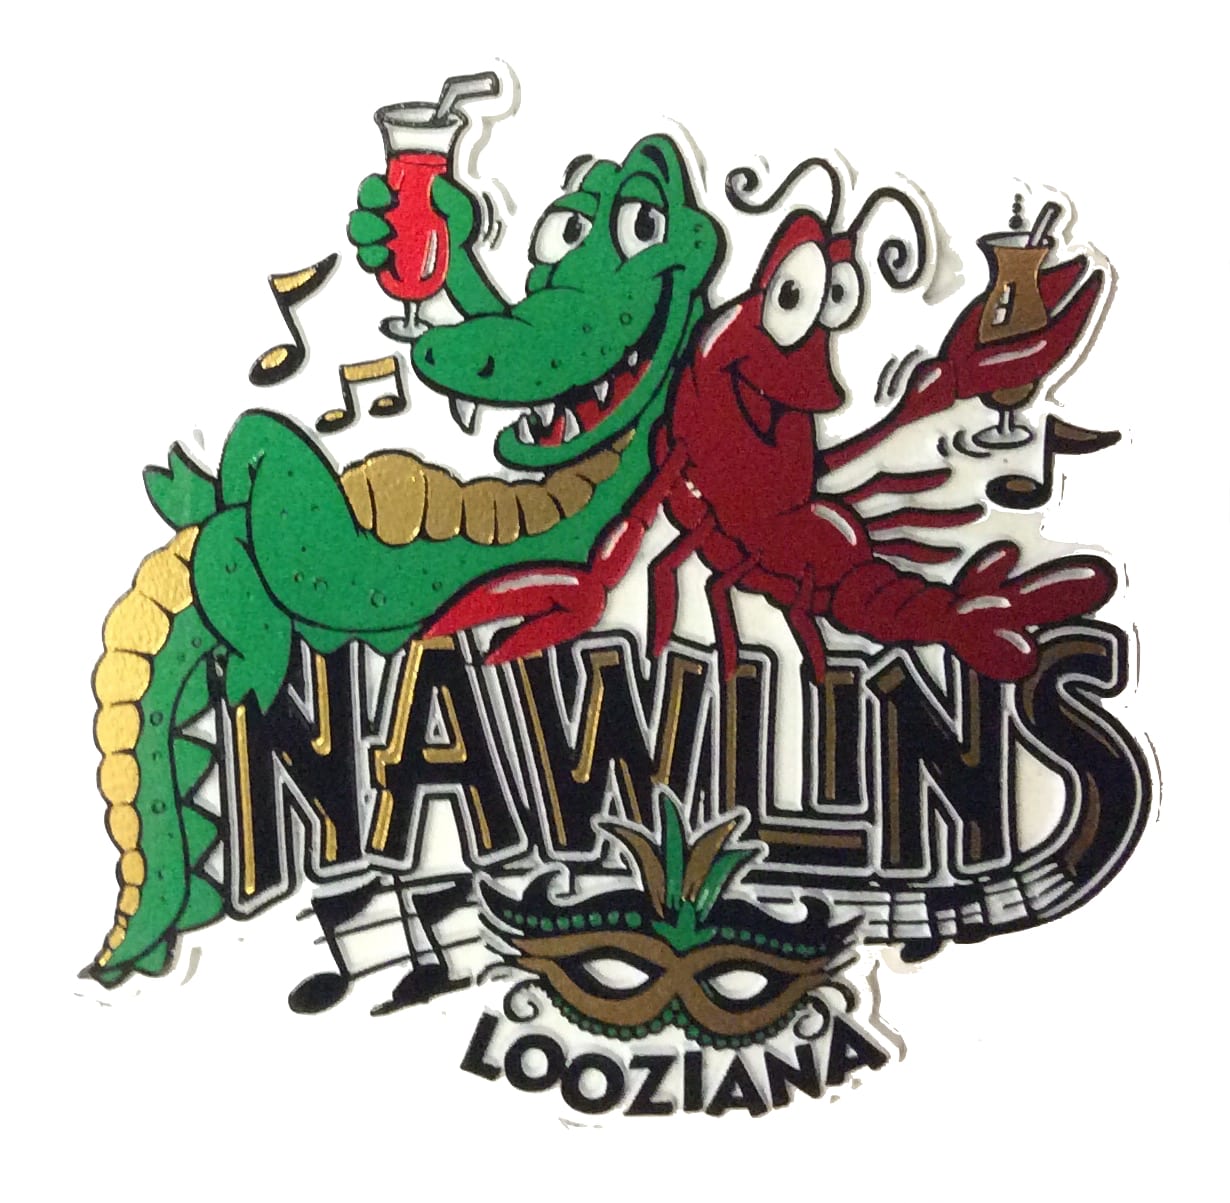 Gator and Crawfish Magnet with "Nawlins Looziana" 16320 - Louisiana Gifts and Gallery, Inc.